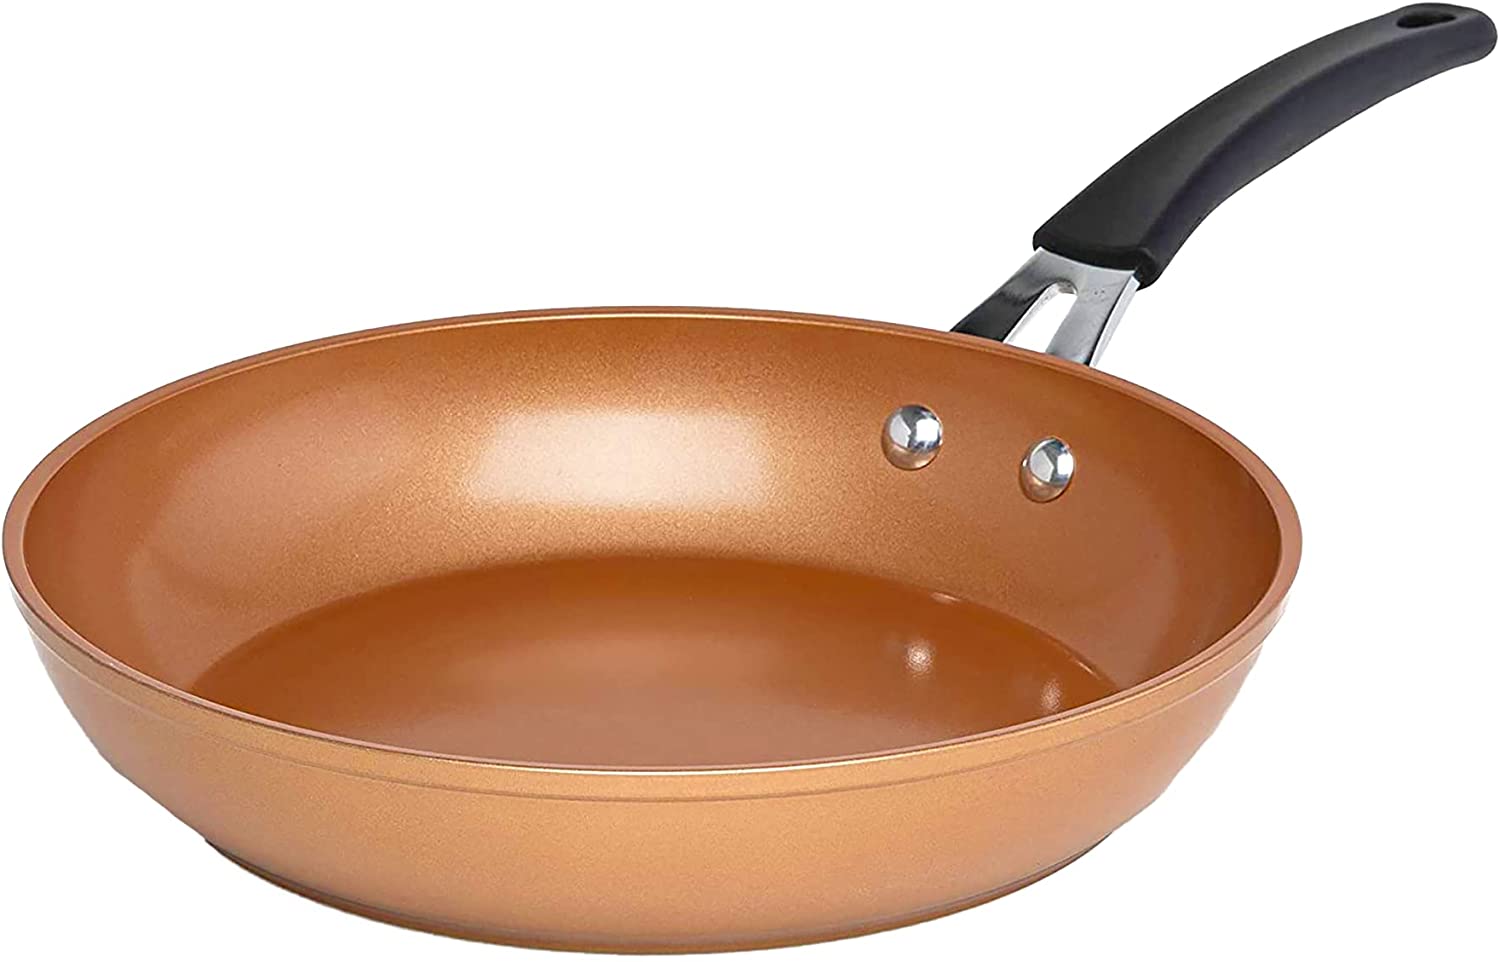 9.5" Ecolution Endure Nonstick Fry Pan w/ Induction Base (copper) $10 + free shipping w/ Prime or on orders over $25